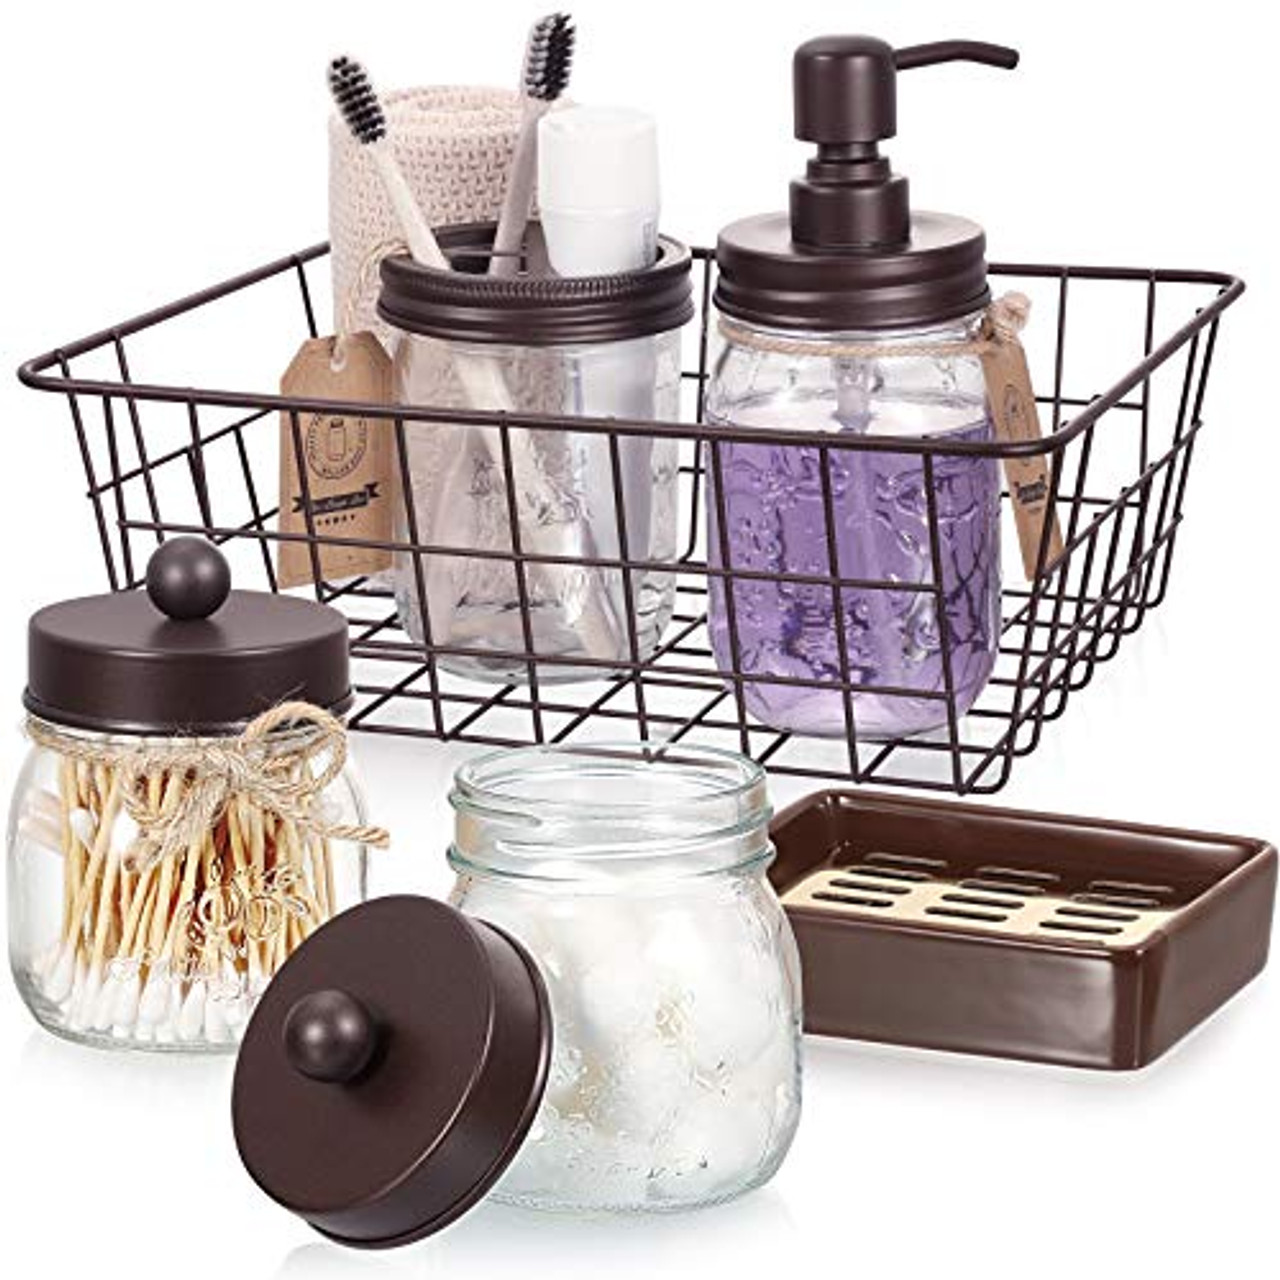 Farmhouse Rustic Decorative Mason Jars, Bathroom Vanity Storage Organizer  Canisters,Cute Glass Apothecary Jars with Stainless Steel Lid for Cotton